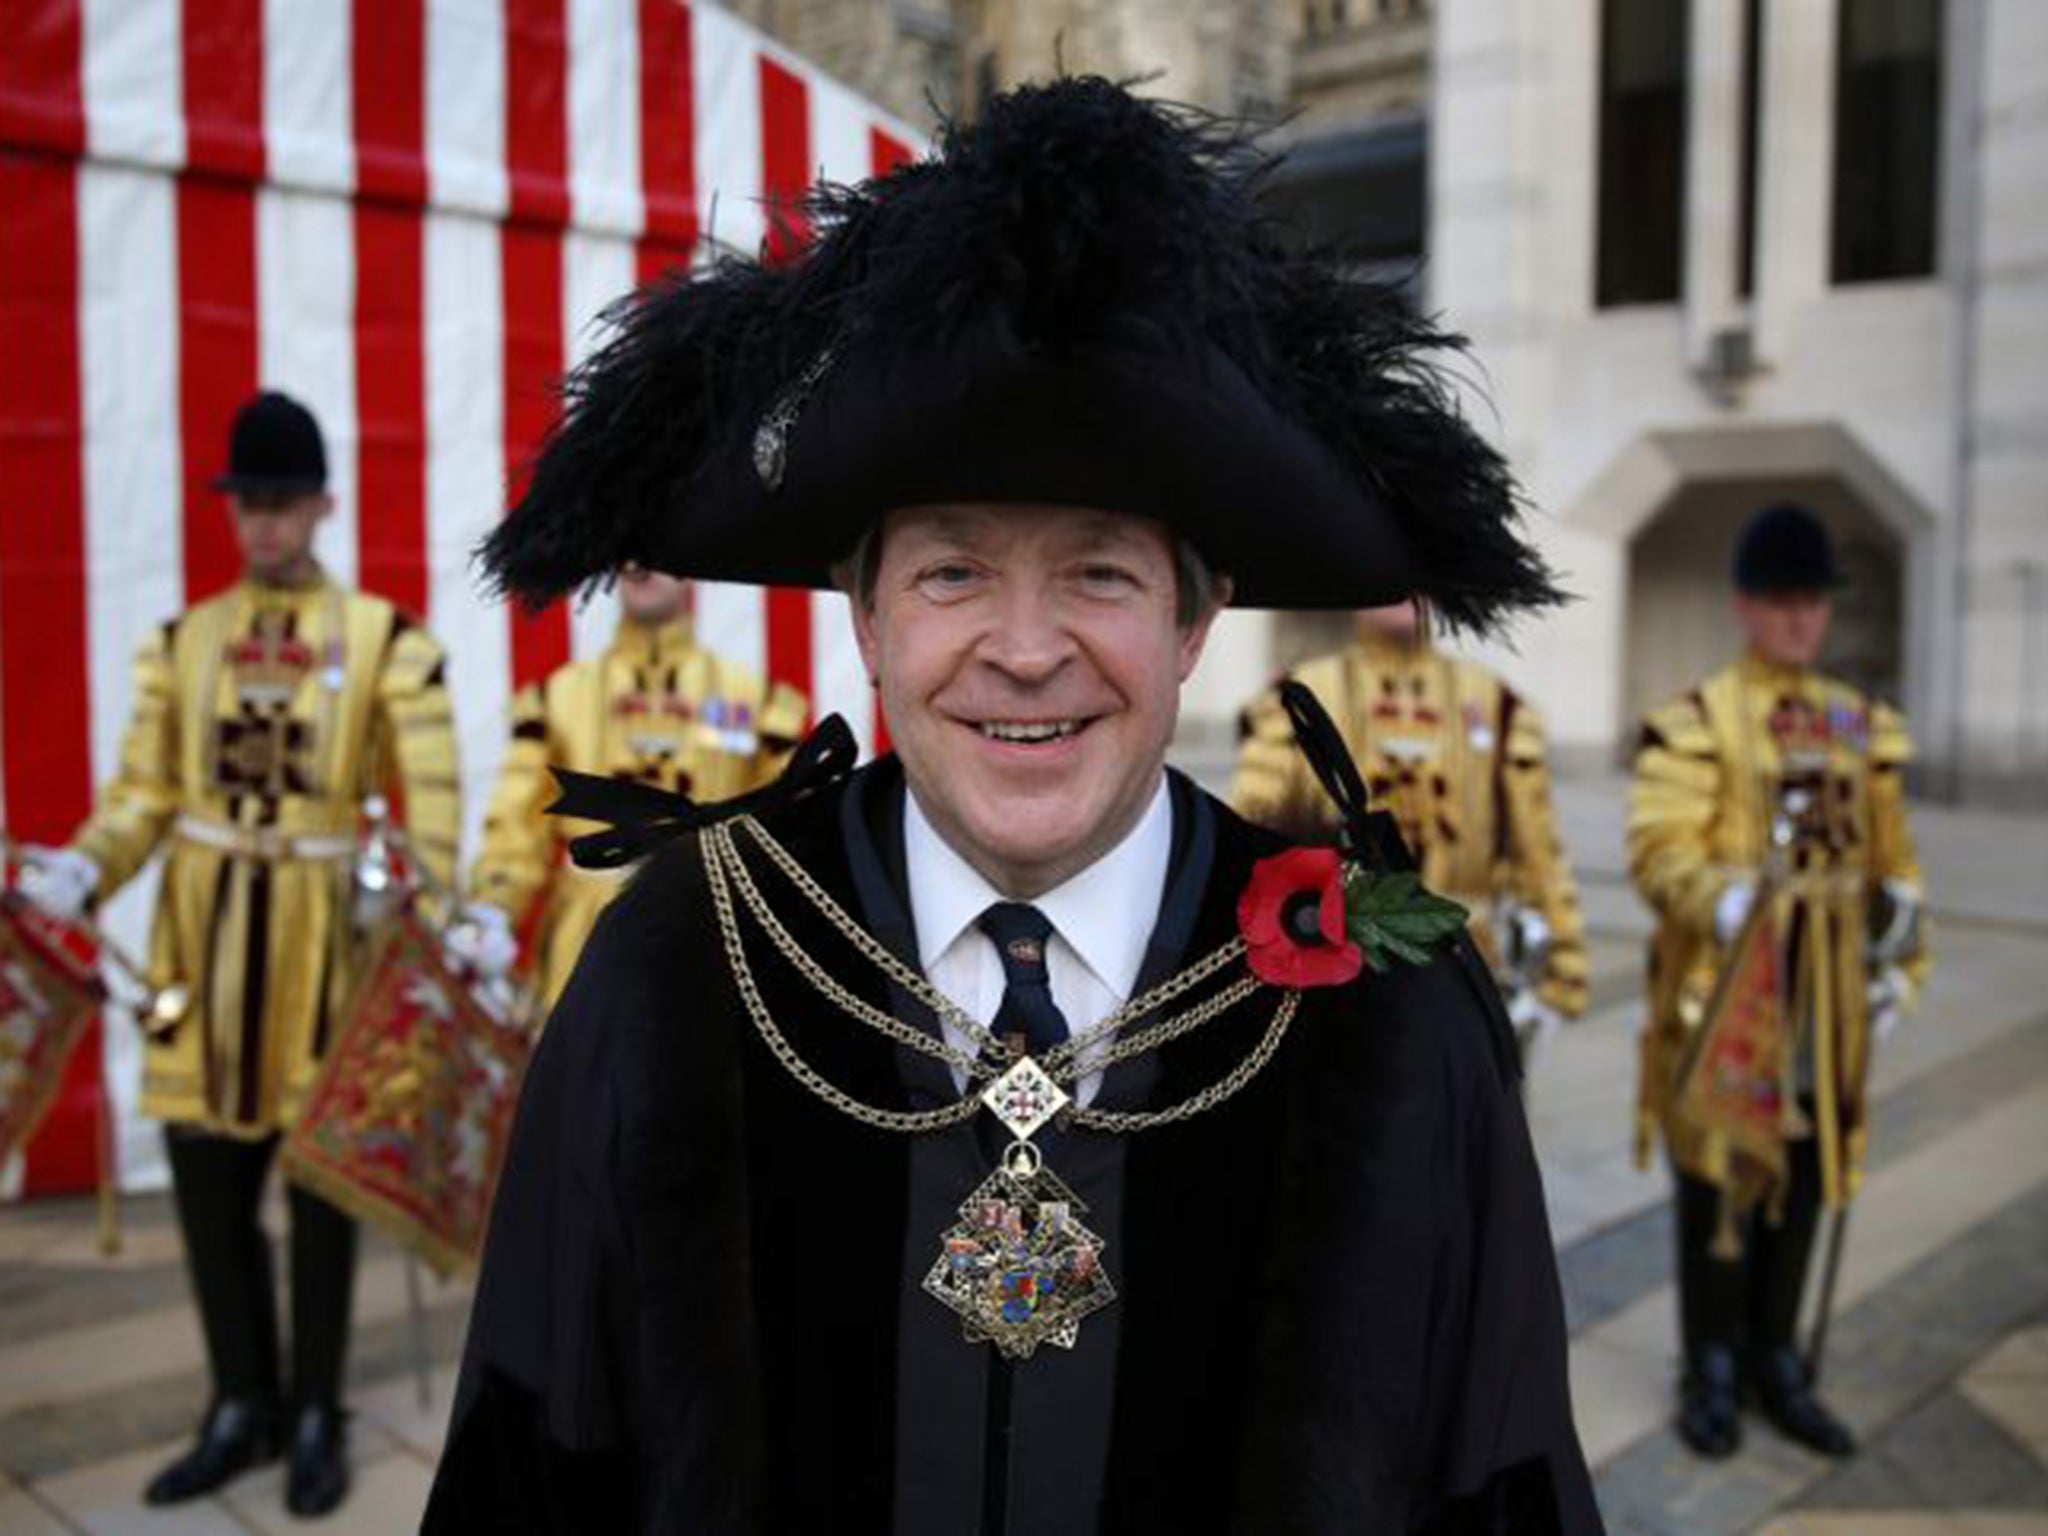 The New Lord Mayor of London Roger Gifford stands outside the Guildhall after attending the Silent Ceremony on November 9, 2012